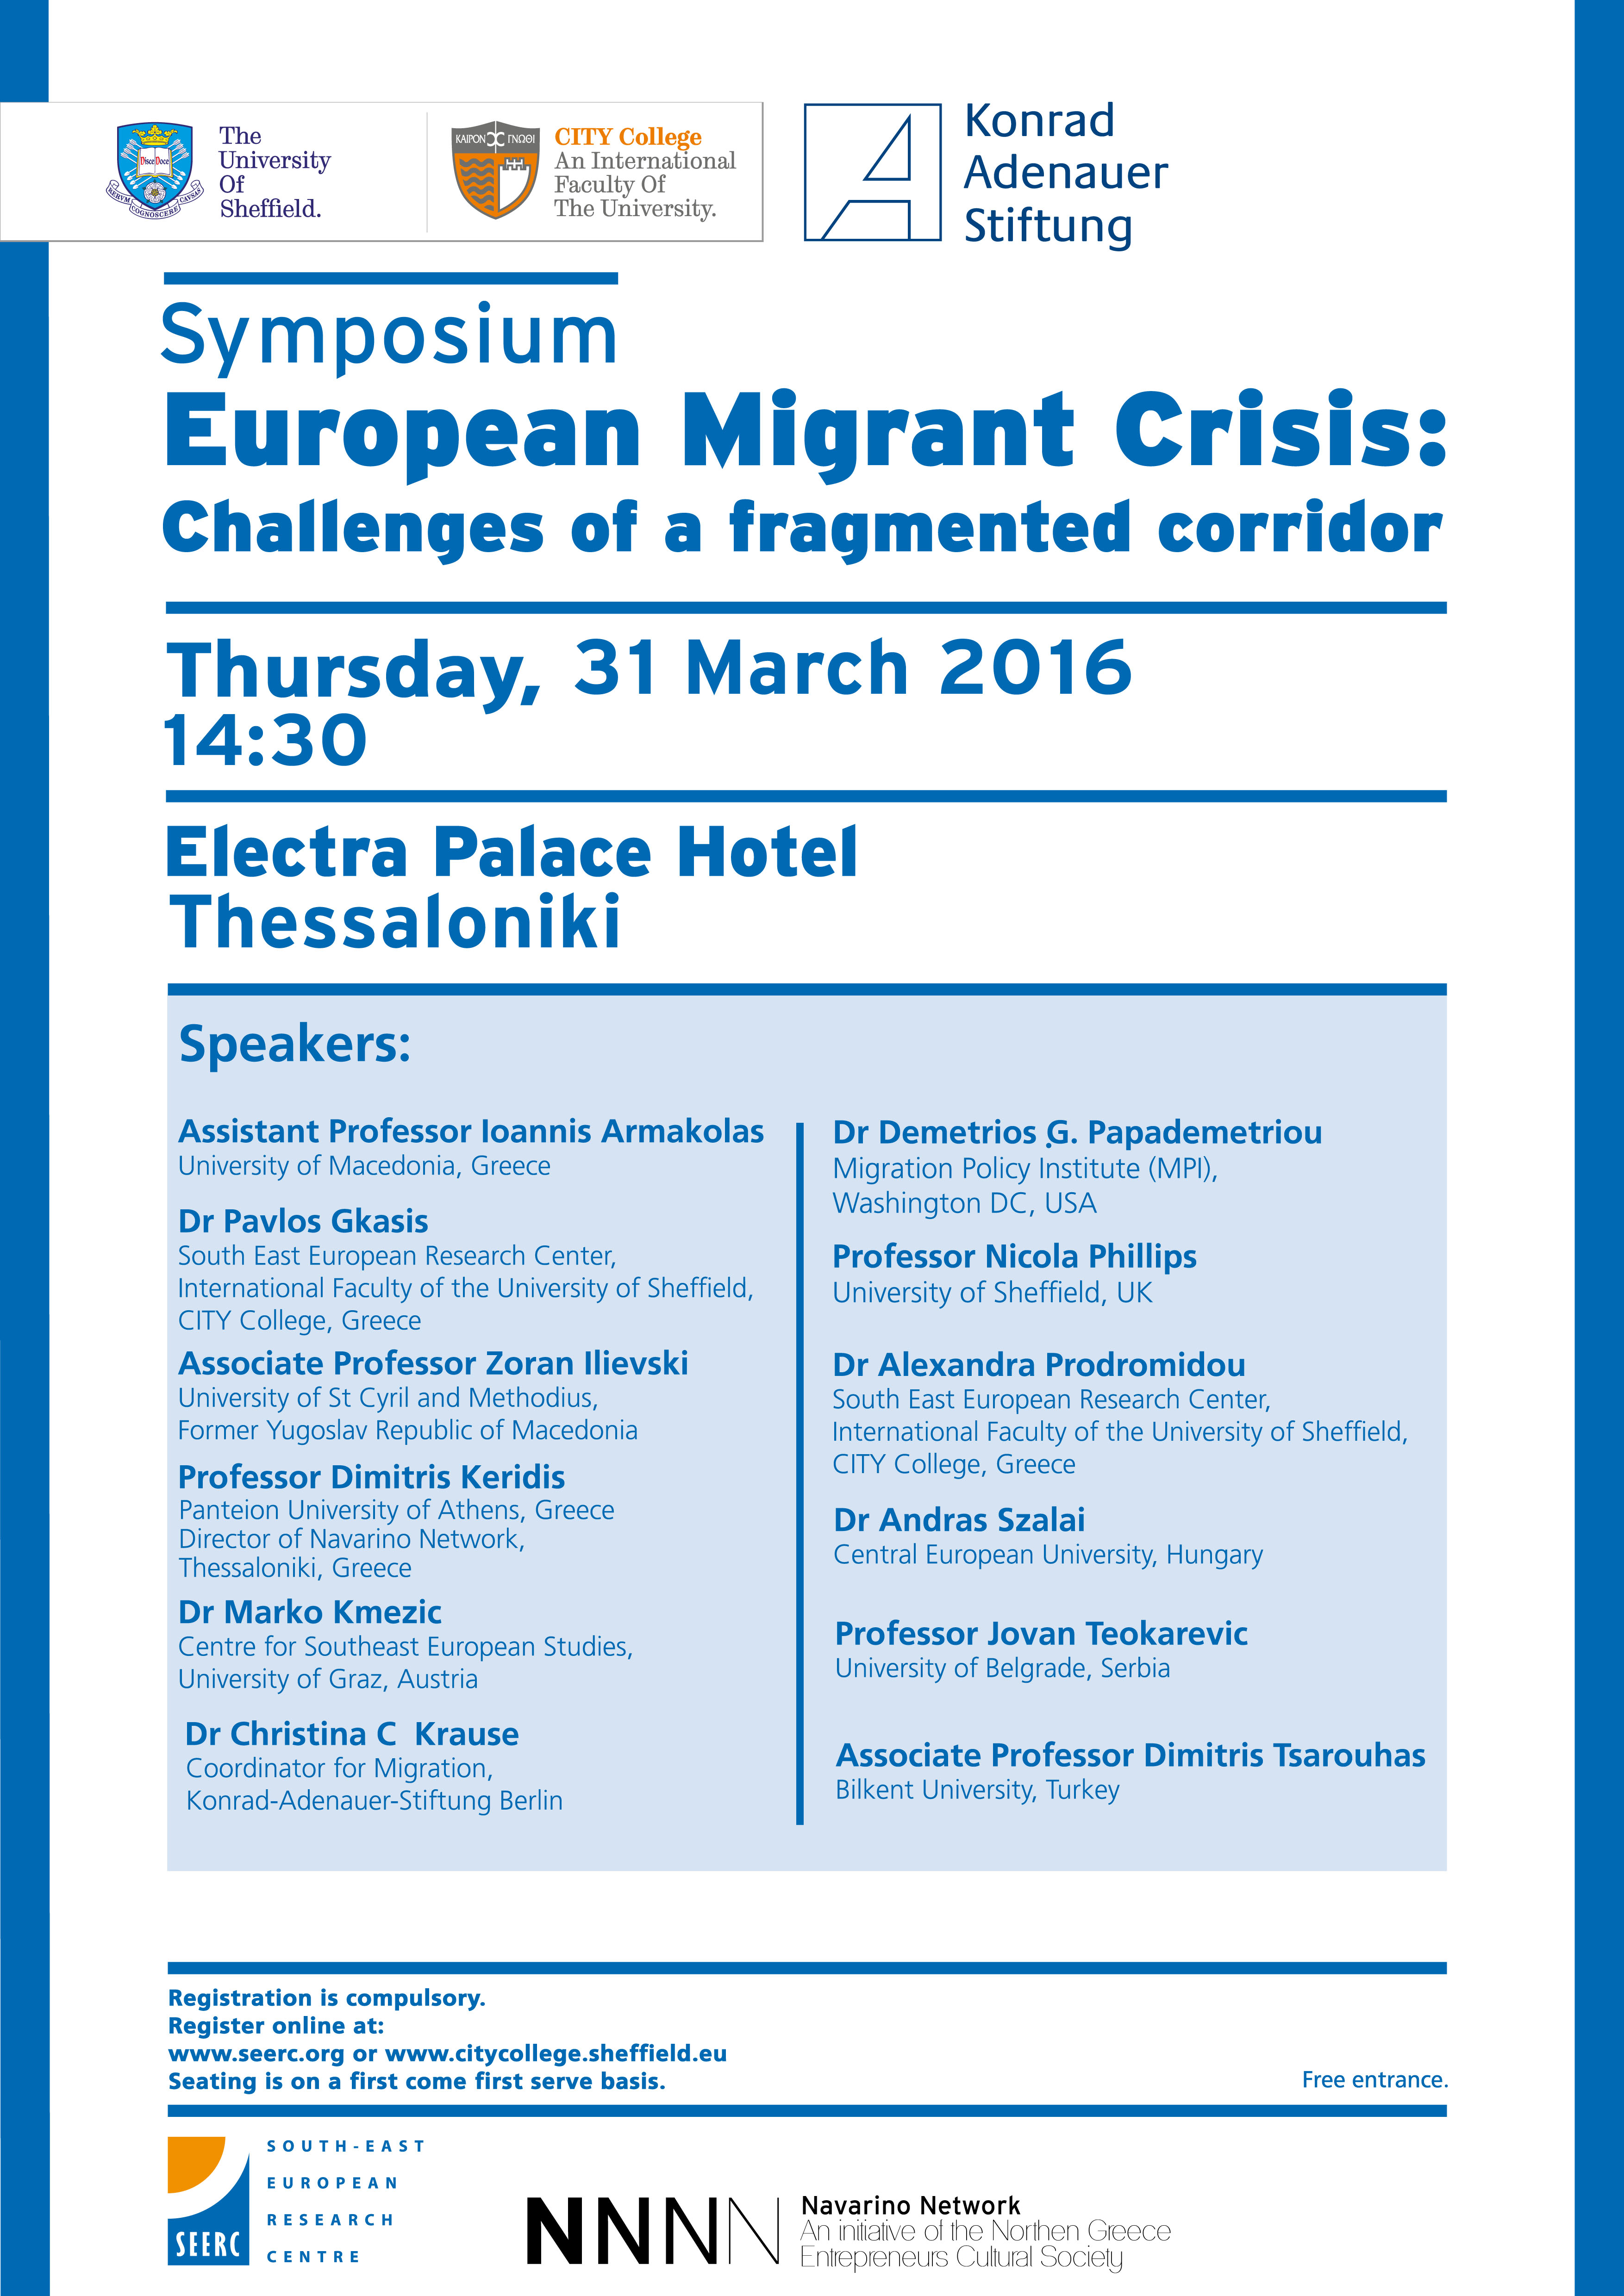 Symposium: European Migrant Crisis: Challenges of a fragmented corridor (31 March 2016)